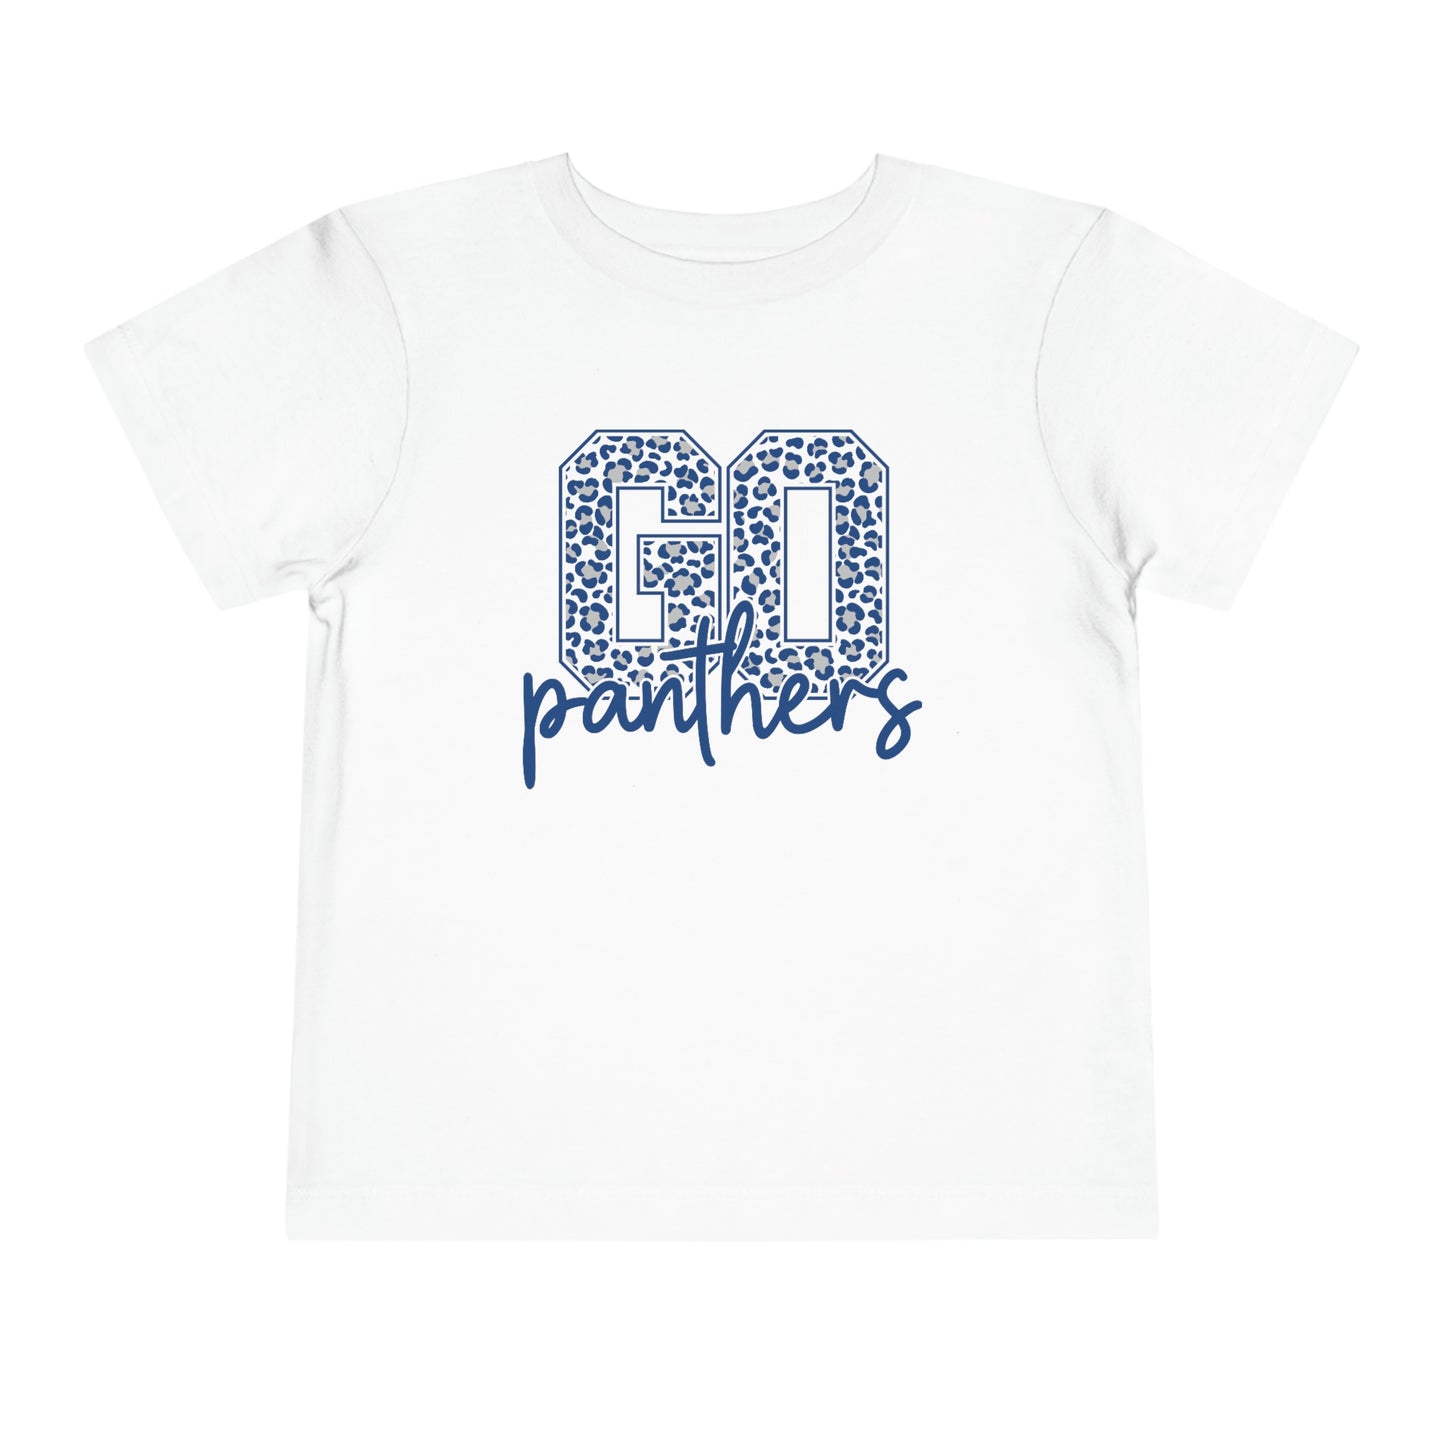 Leopard Go Panthers Toddler Tee